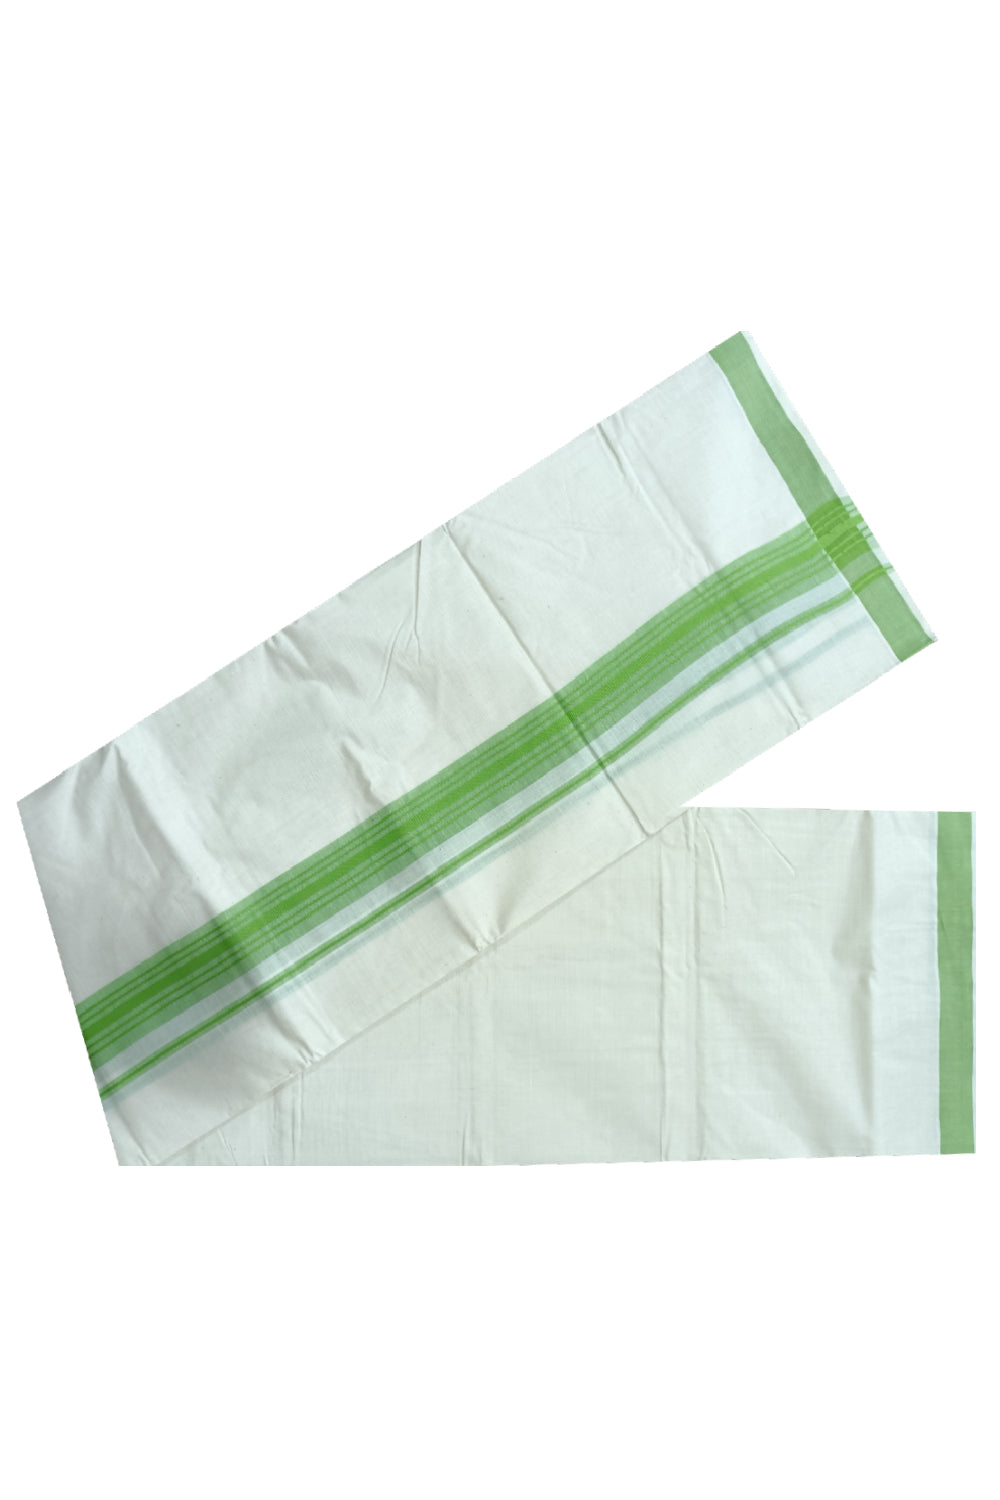 Off White Kerala Double Mundu with Light Green Lines Border (South Indian Dhoti)